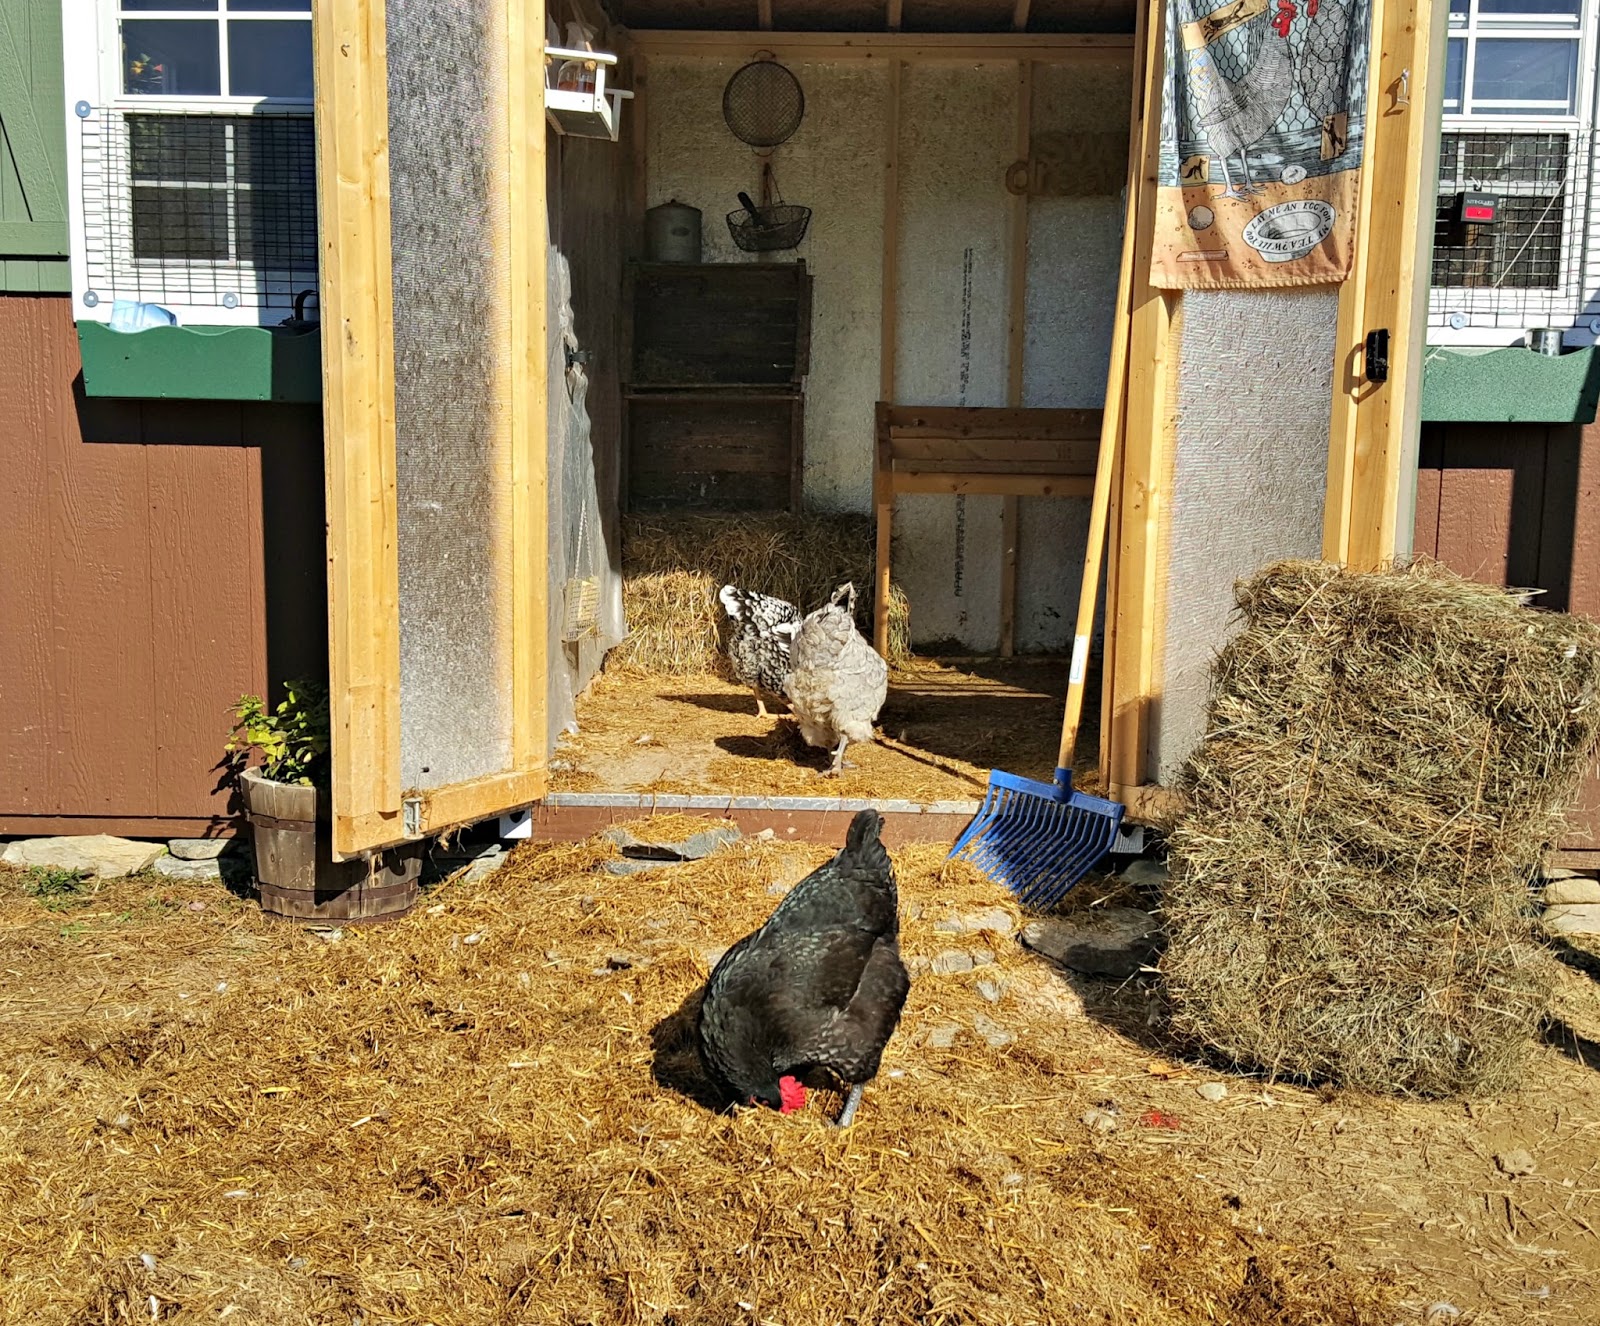 Chickens in a coop with one pecking at the ground and another standing on the doorway